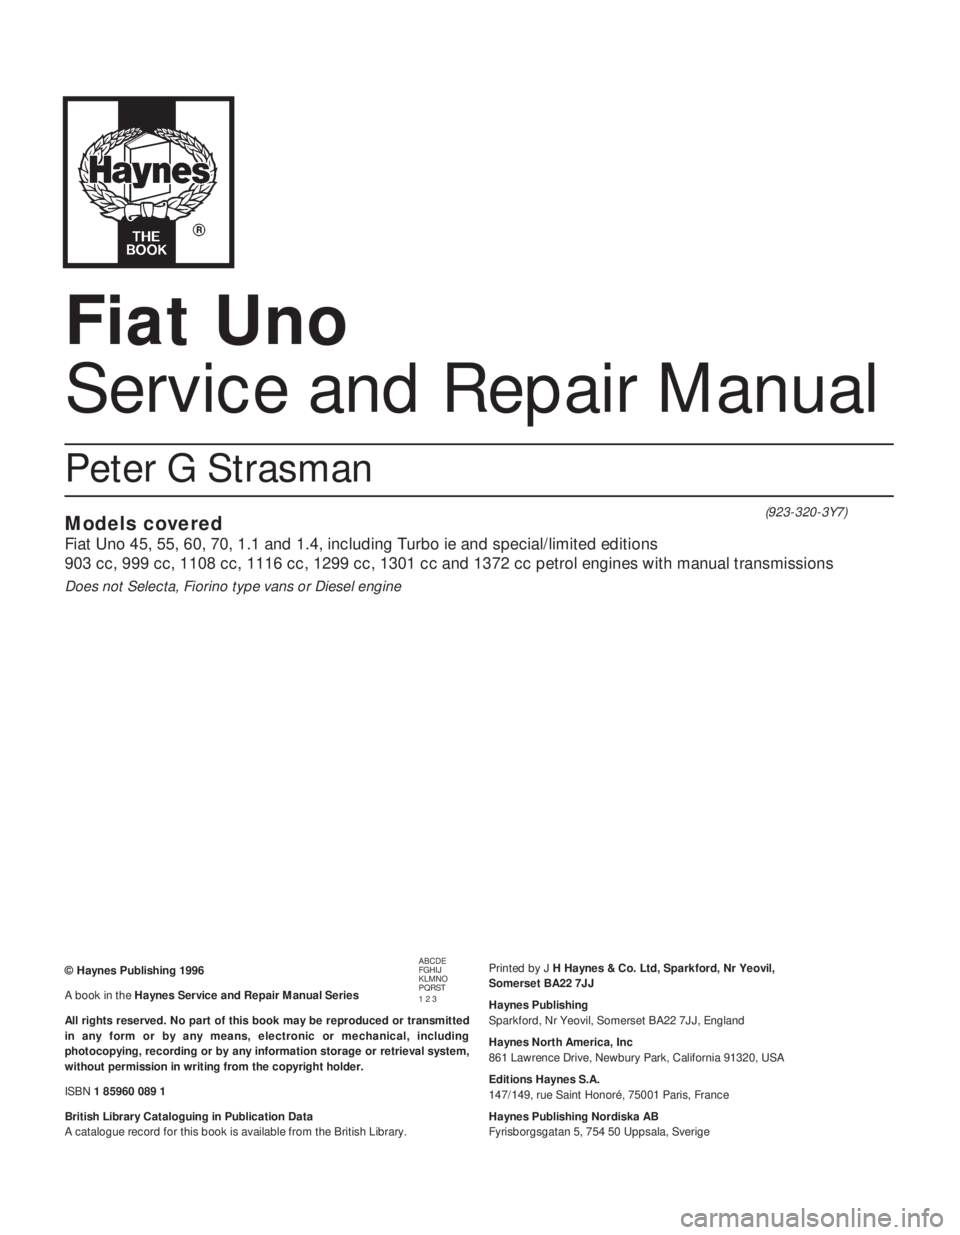 FIAT UNO 1983  Service Repair Manual Fiat Uno
Service and Repair Manual
Peter G Strasman
Models covered
Fiat Uno 45, 55, 60, 70, 1.1 and 1.4, including Turbo ie and special/limited editions
903 cc, 999 cc, 1108 cc, 1116 cc, 1299 cc, 1301